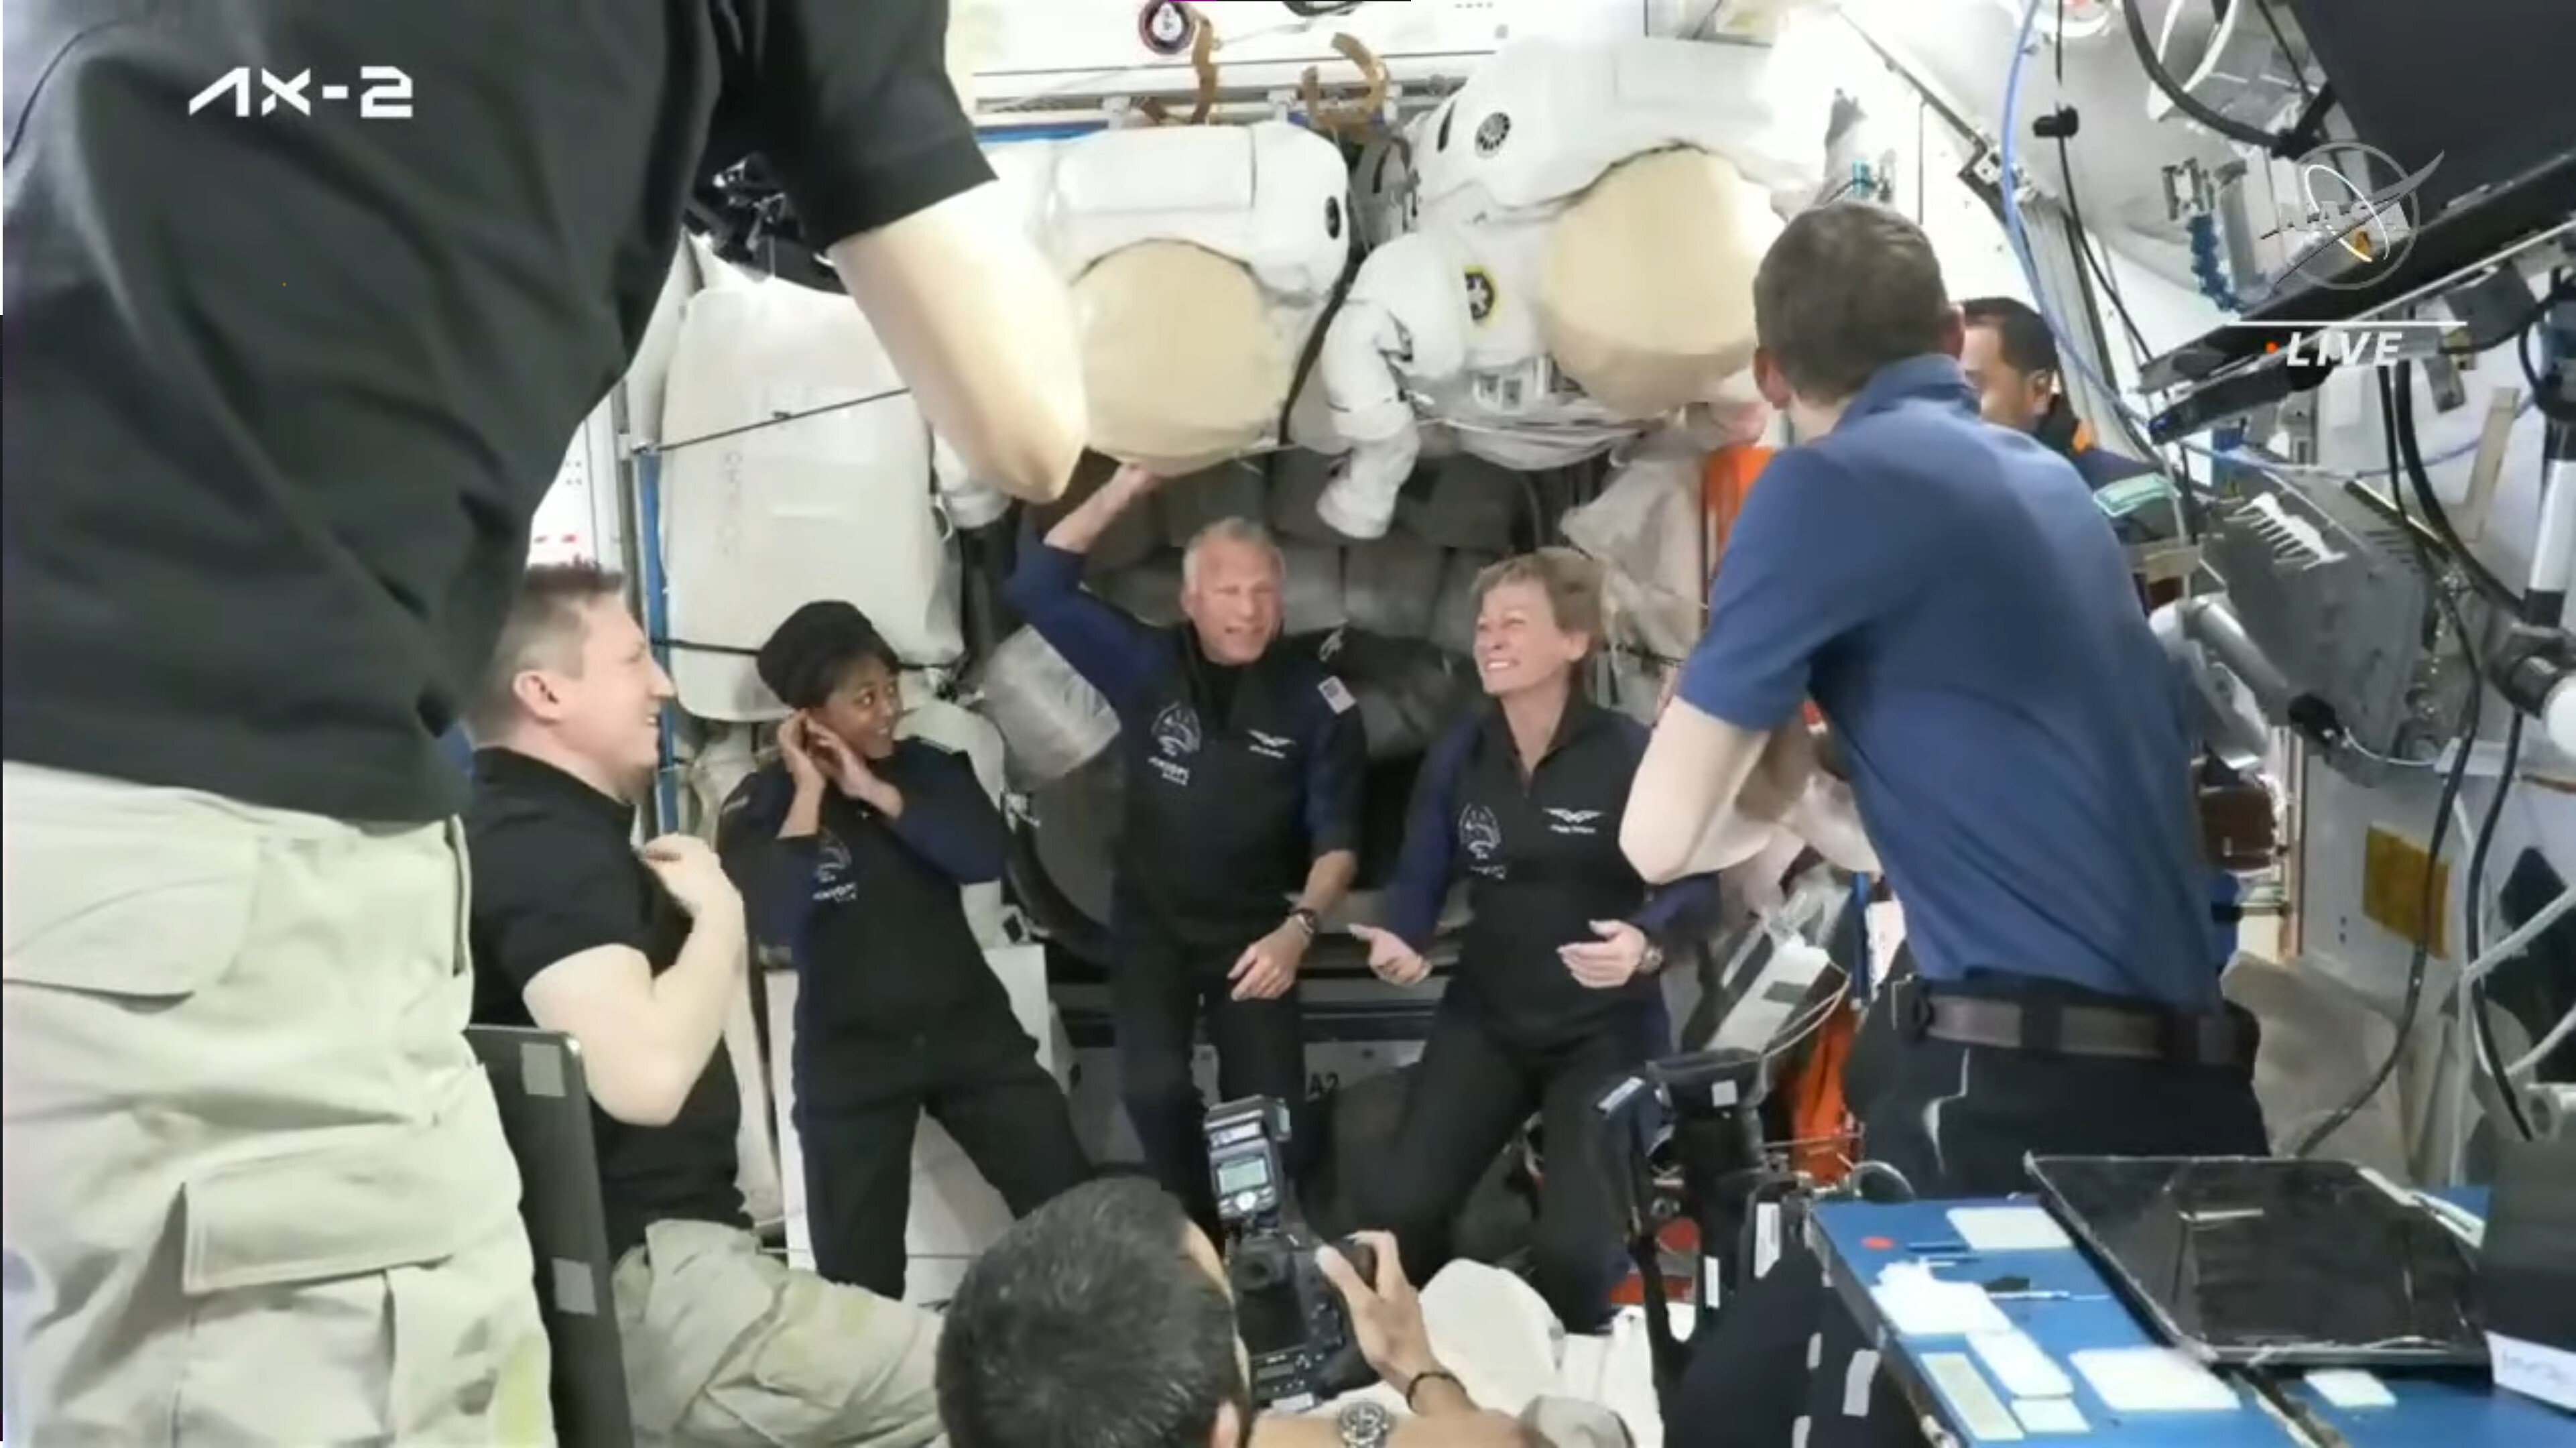 Astronauts welcome four new crewmembers from the private Ax-2 mission inside space station